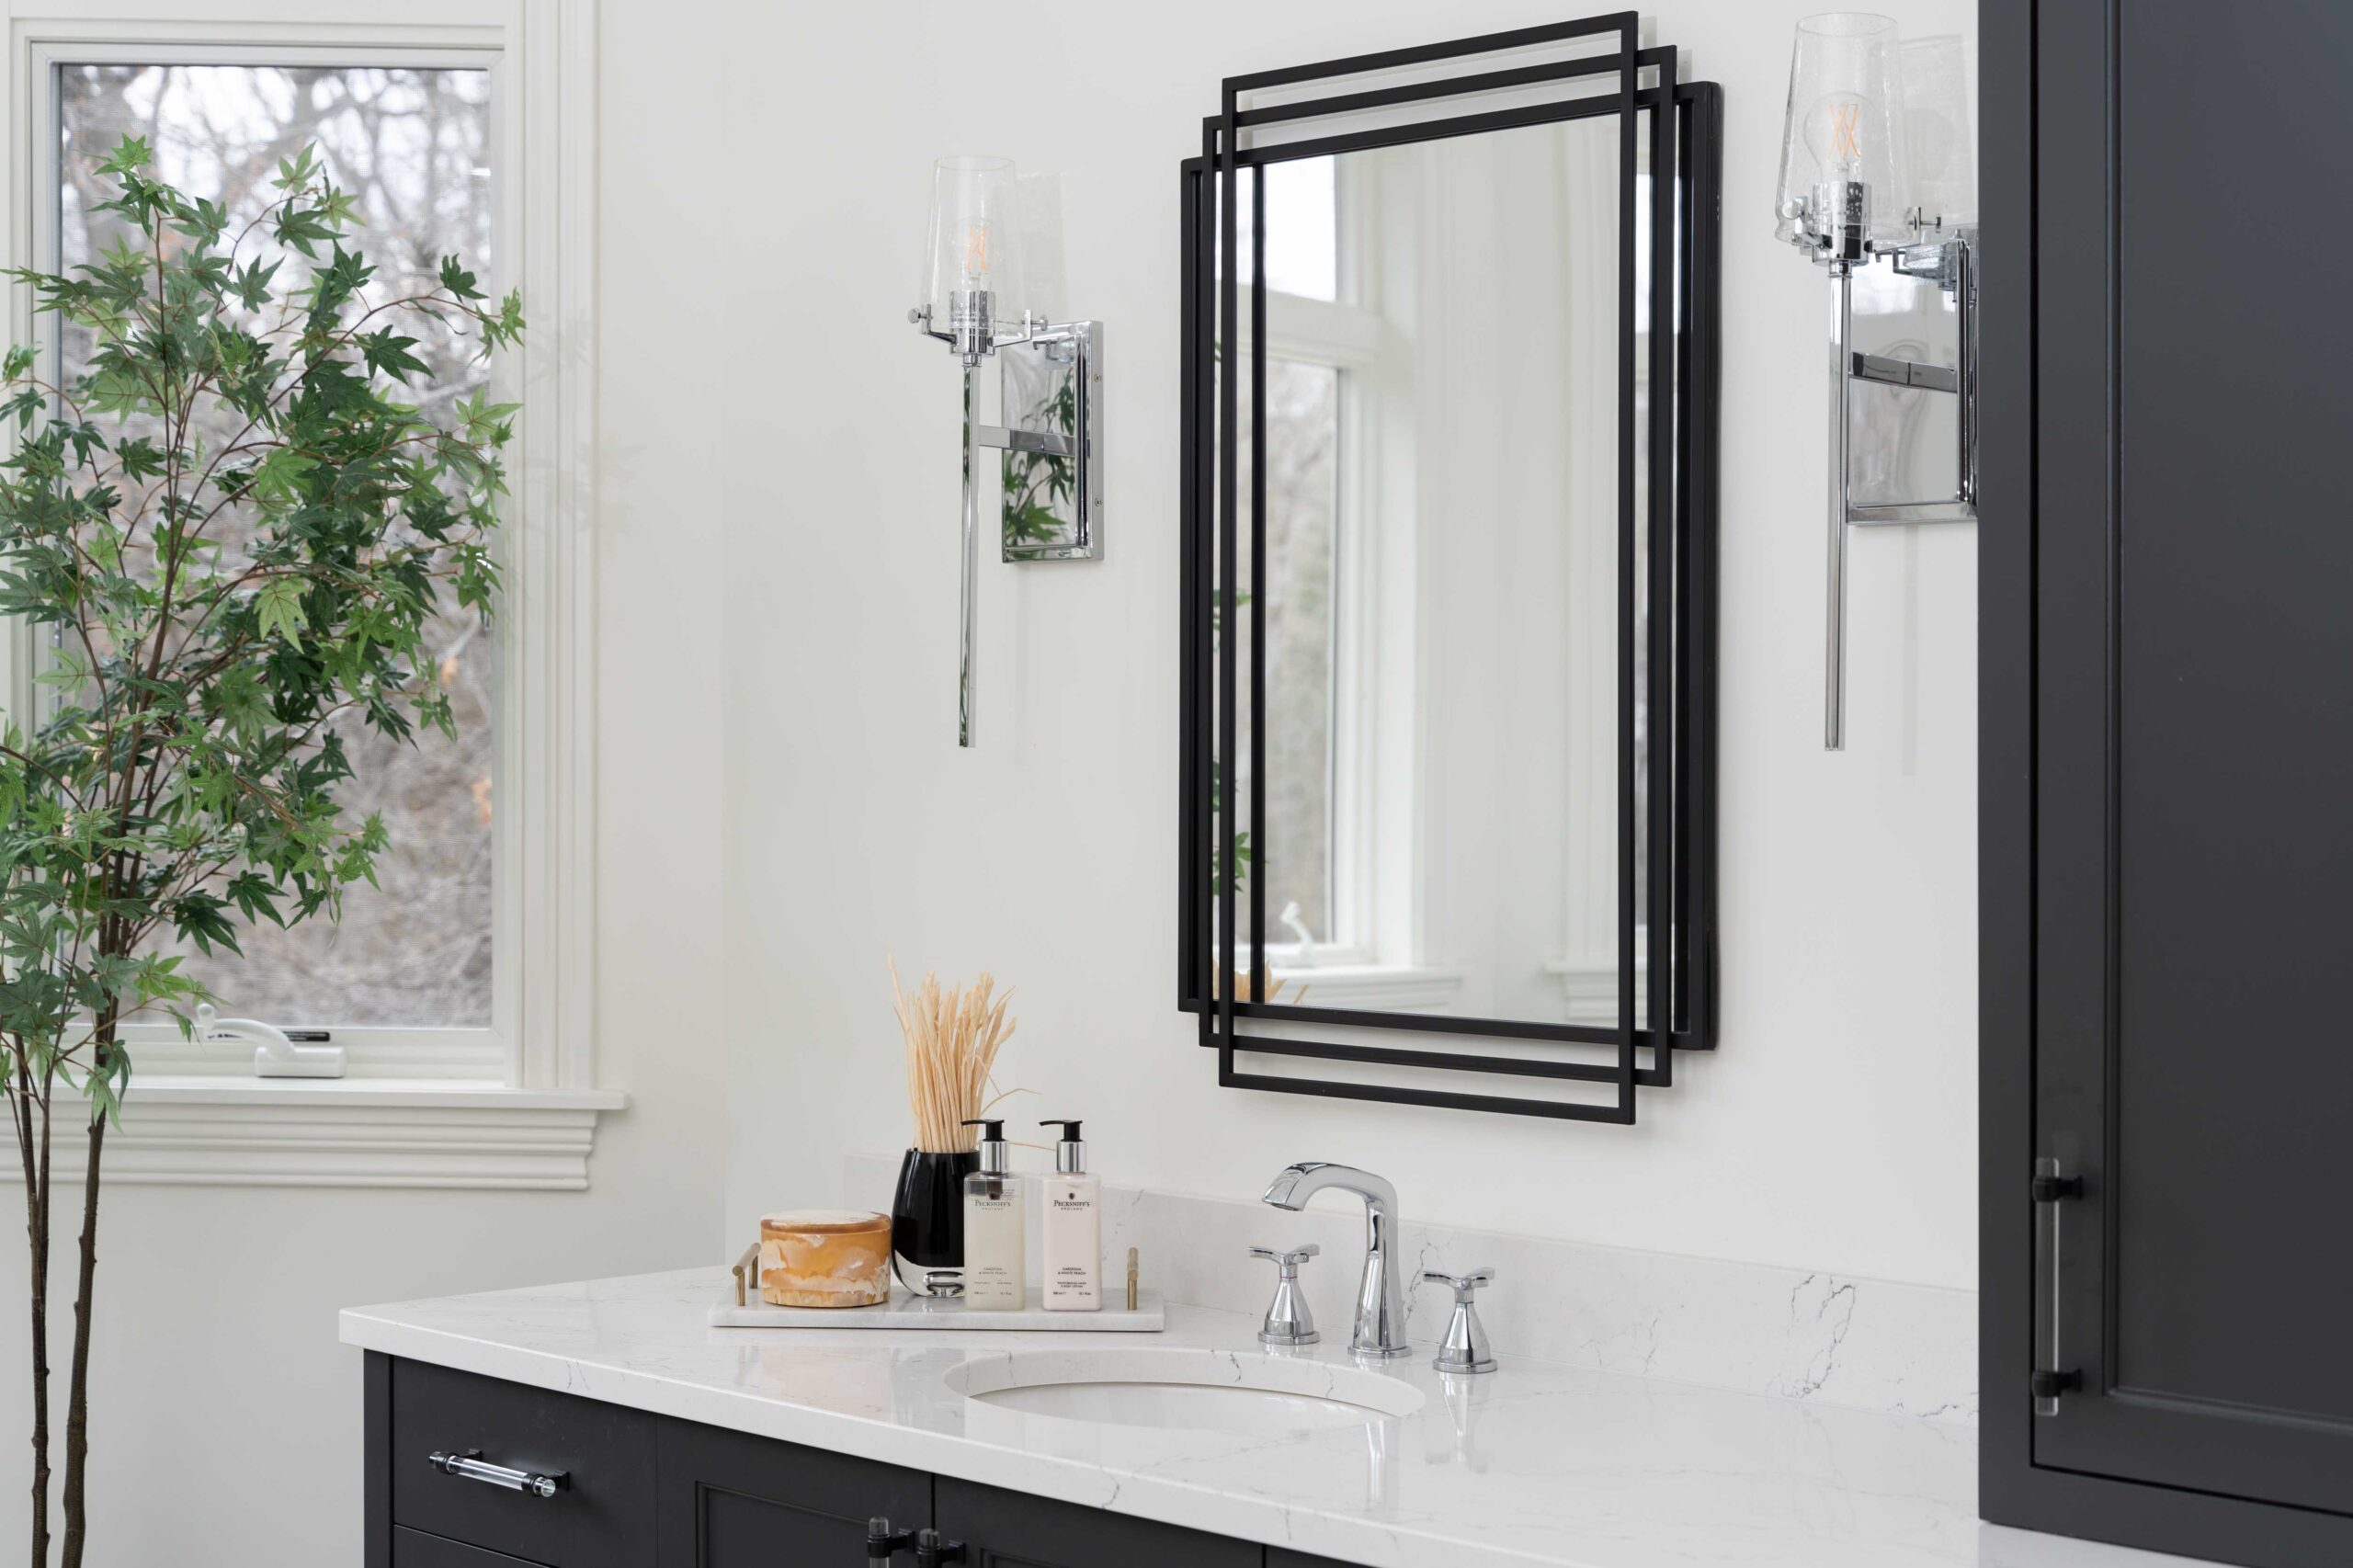 A modern bathroom remodel featuring black cabinets and a mirror.